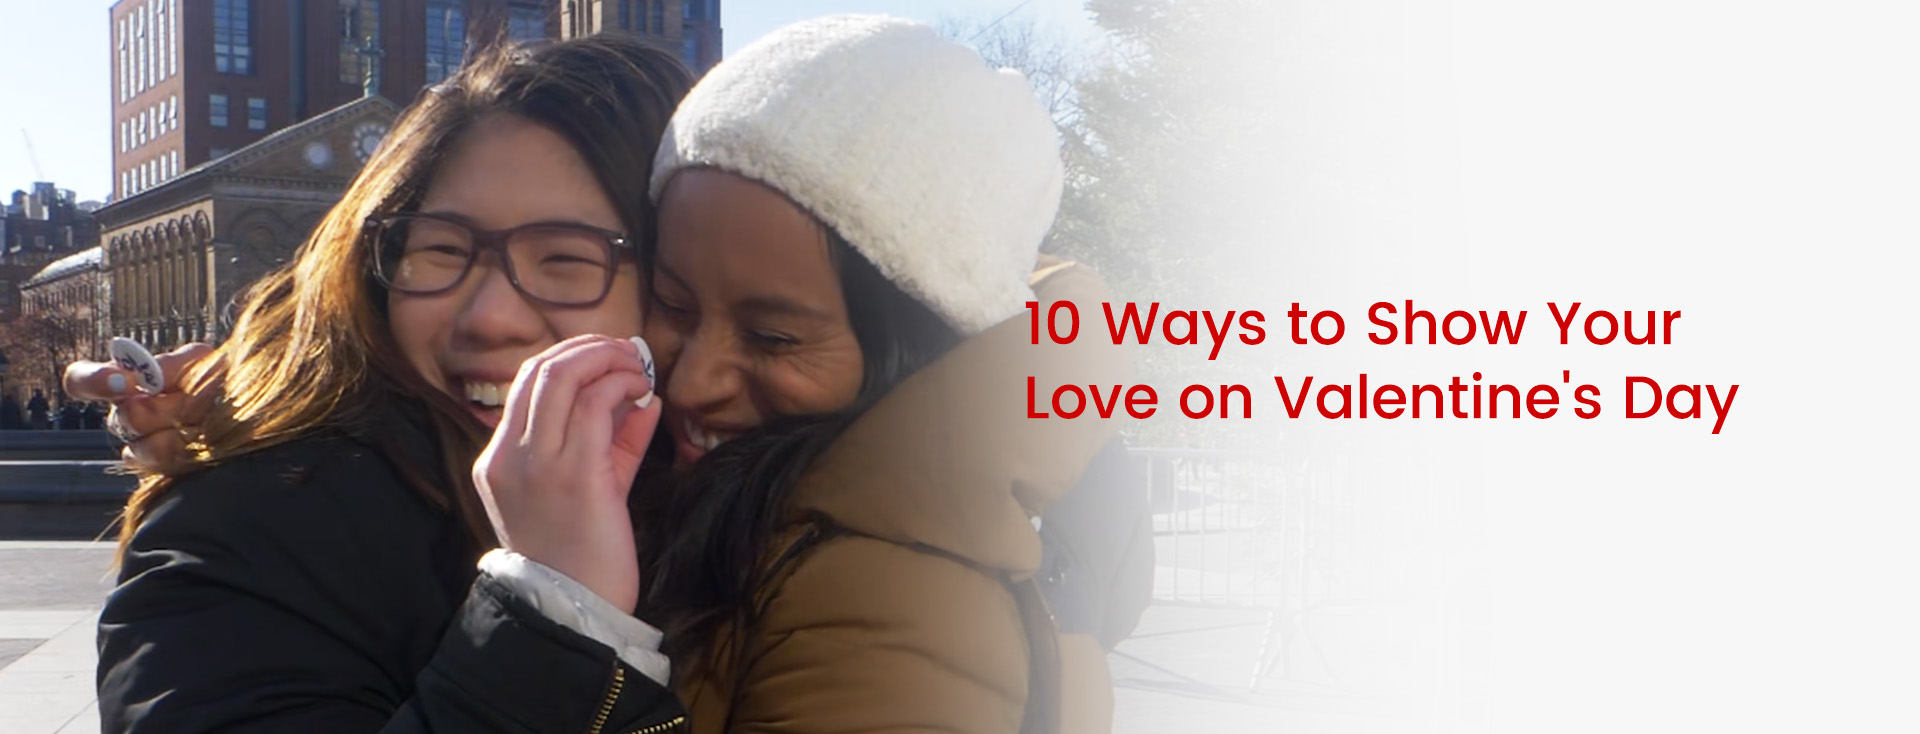 10 Ways to Show Your Love on Valentine's Day